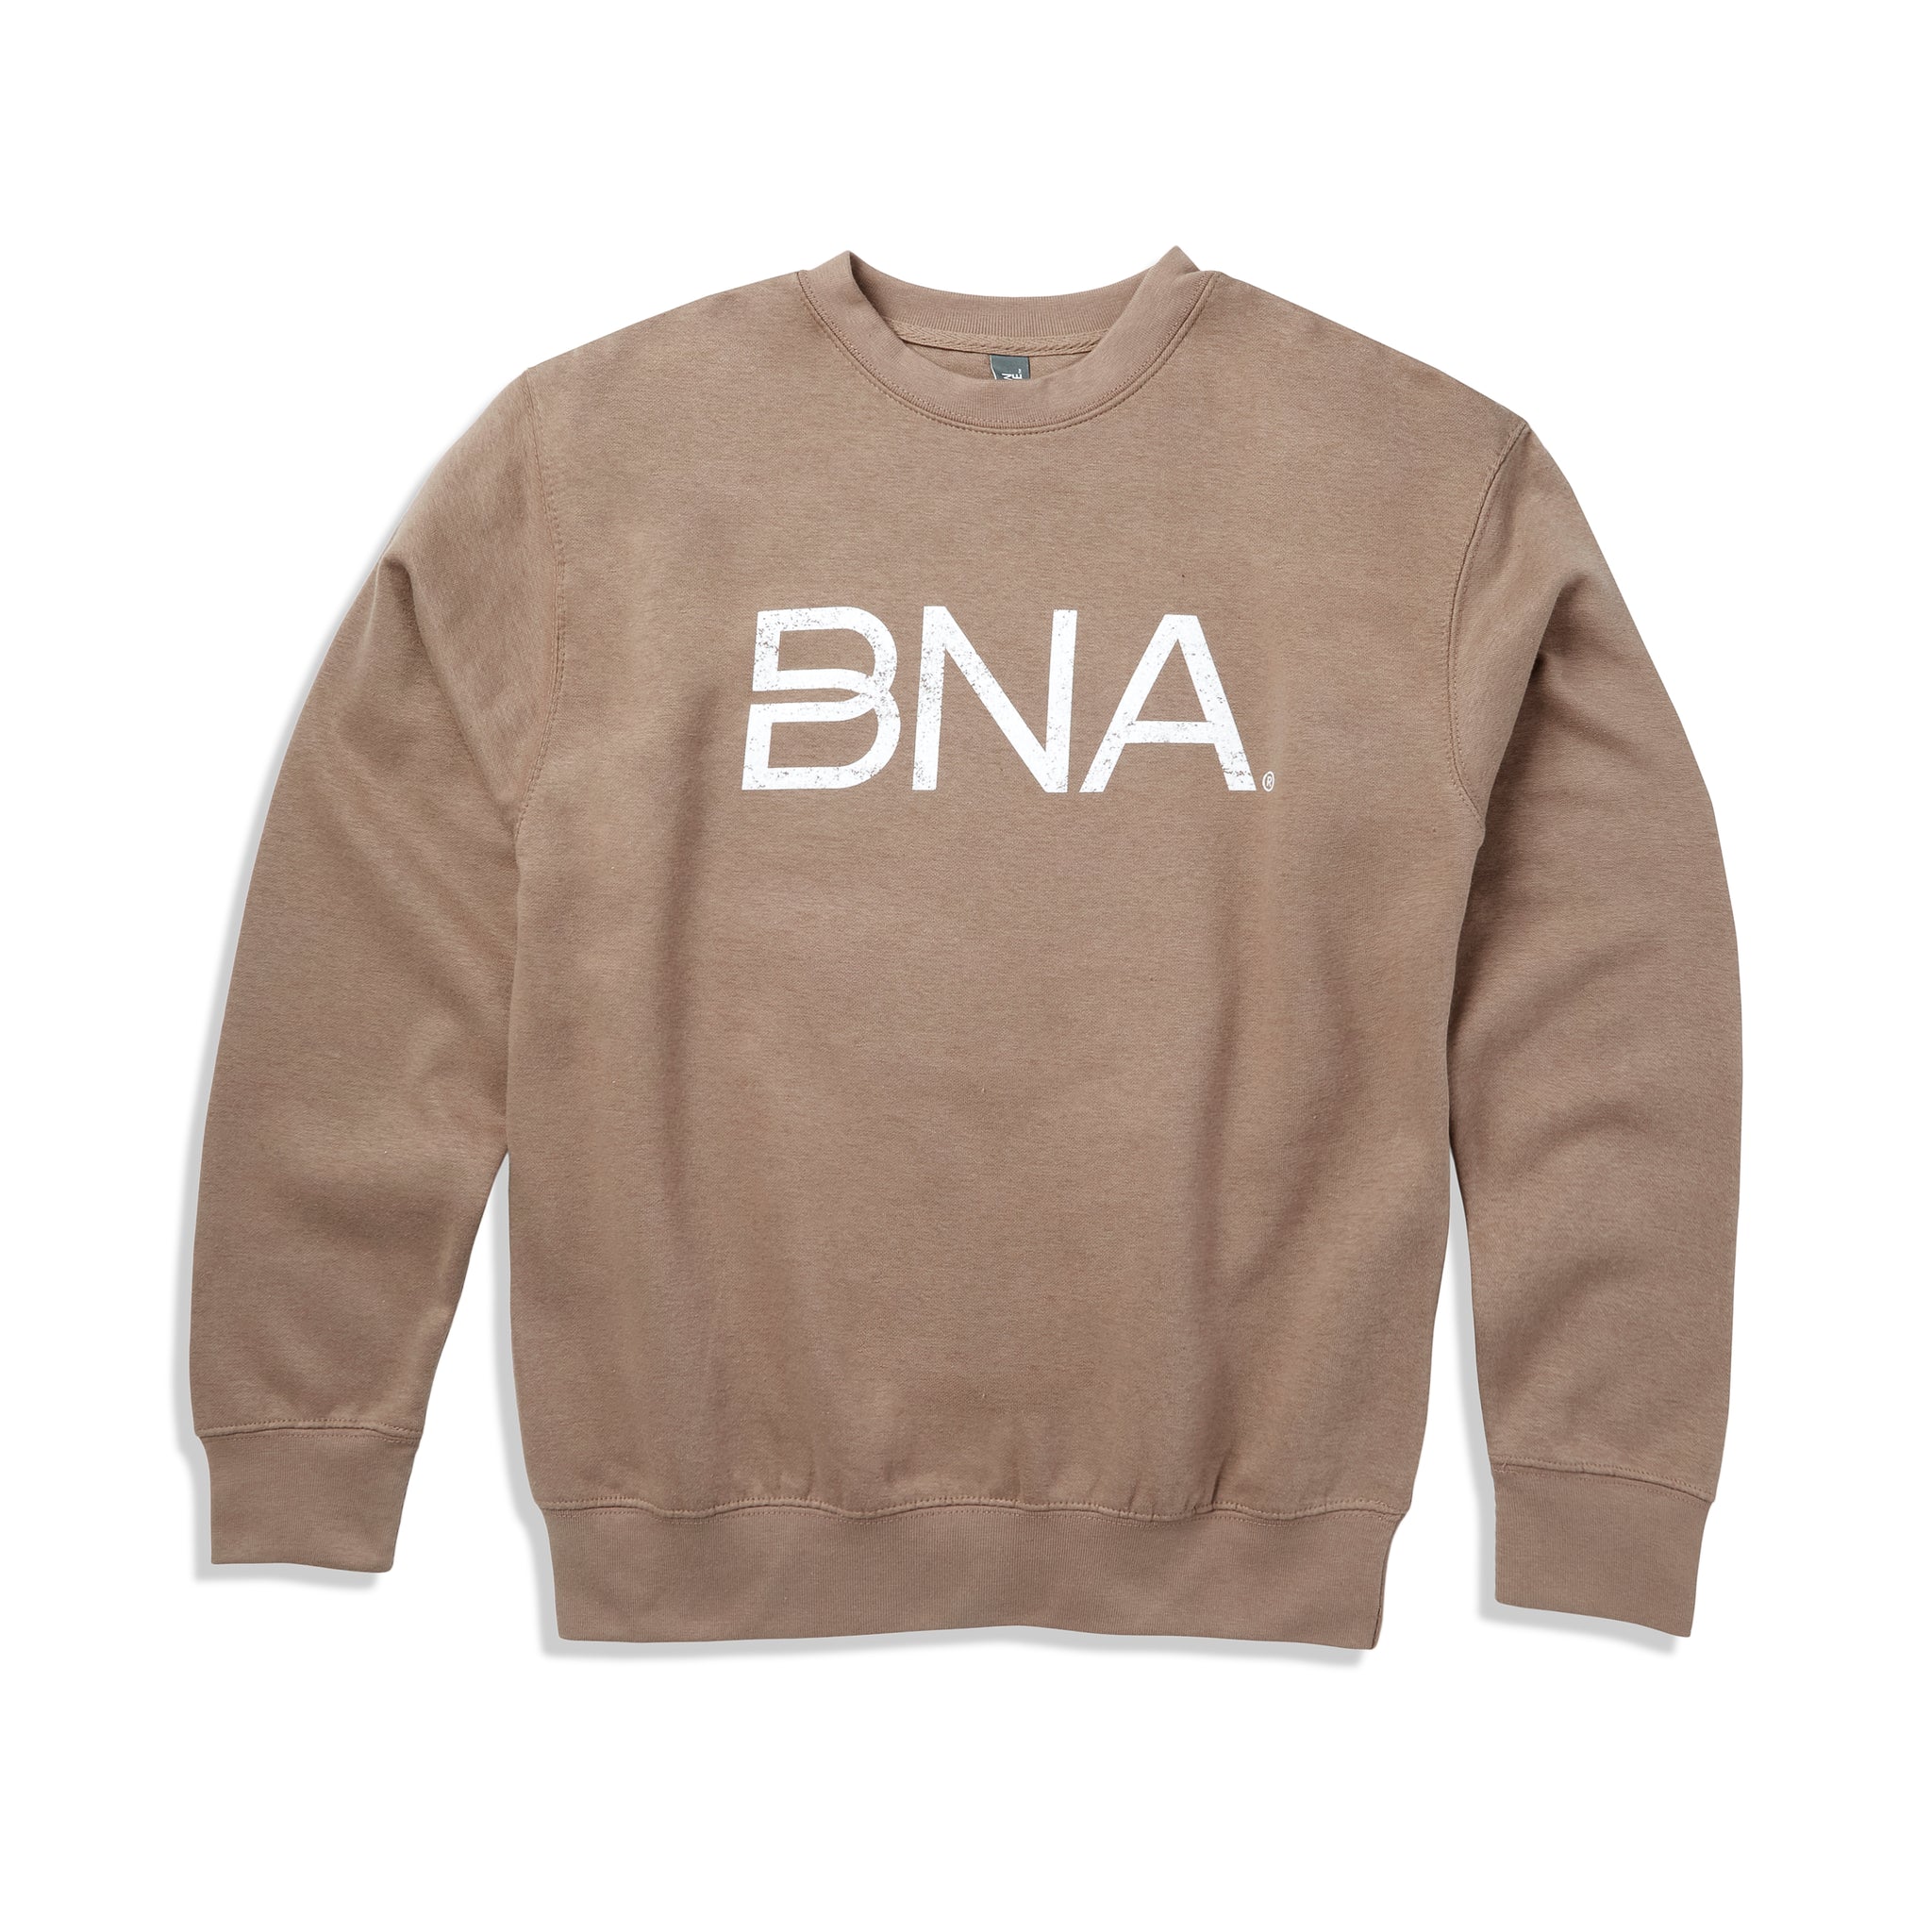 taupe colored crewneck sweatshirt featuring a white distressed BNA logo center of the chest